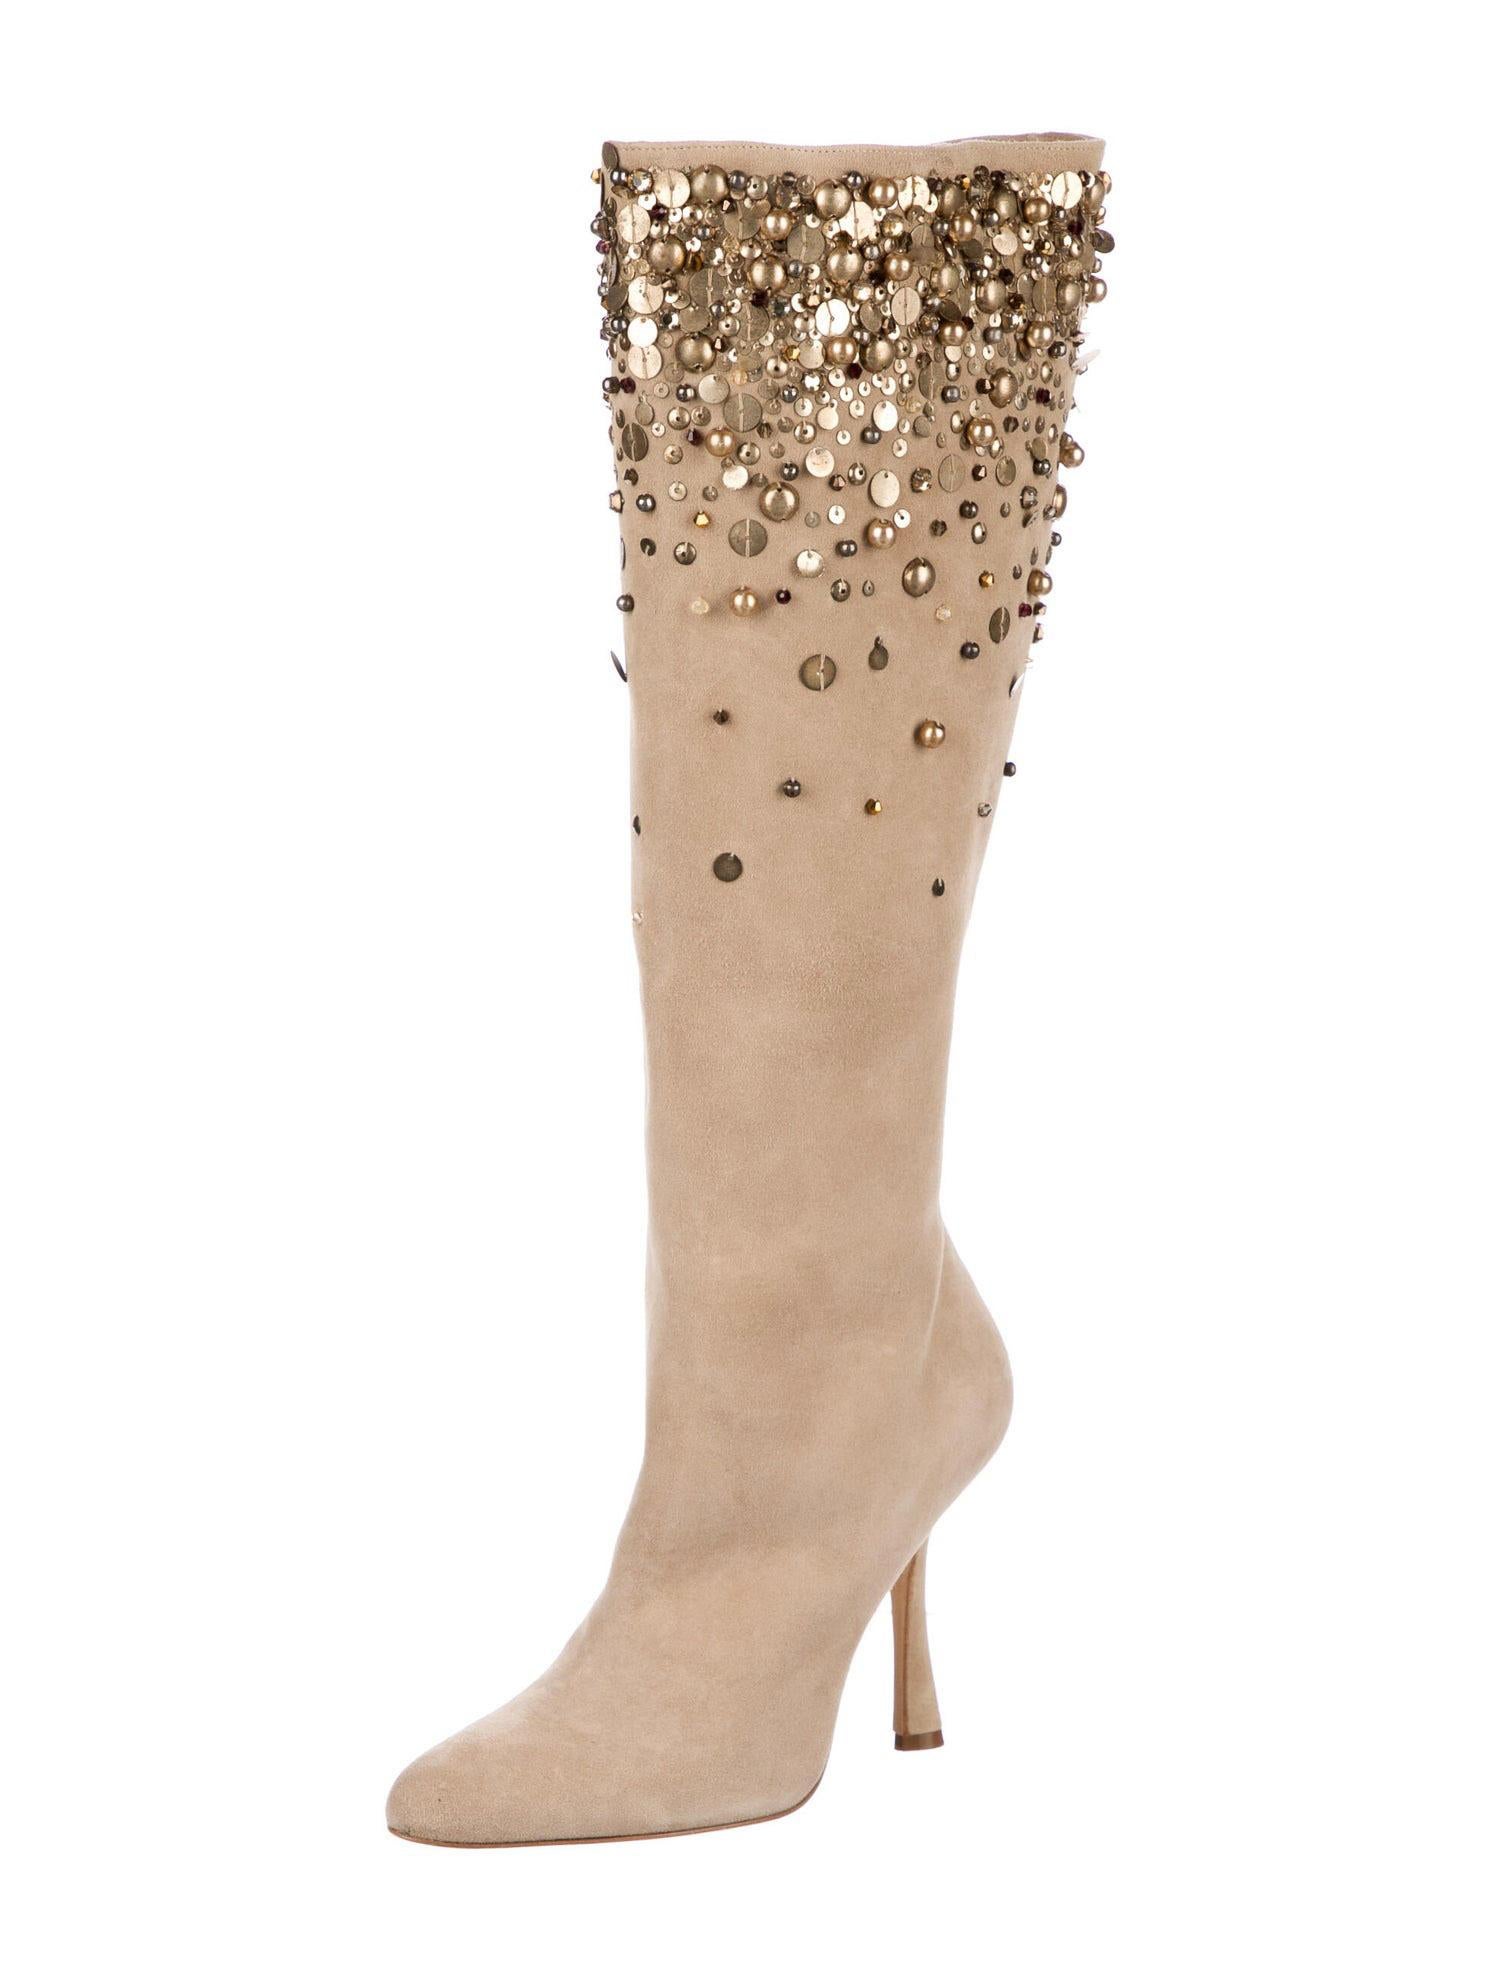 New Oscar De La Renta *Love Ric* Embellished Suede Boots
Italian size 36 - US 6
Beige Suede, Sequins and Beads Embellishment at Shaft, Side Zip, Leather Lining.
Heel Height - 4 inches, 14.5